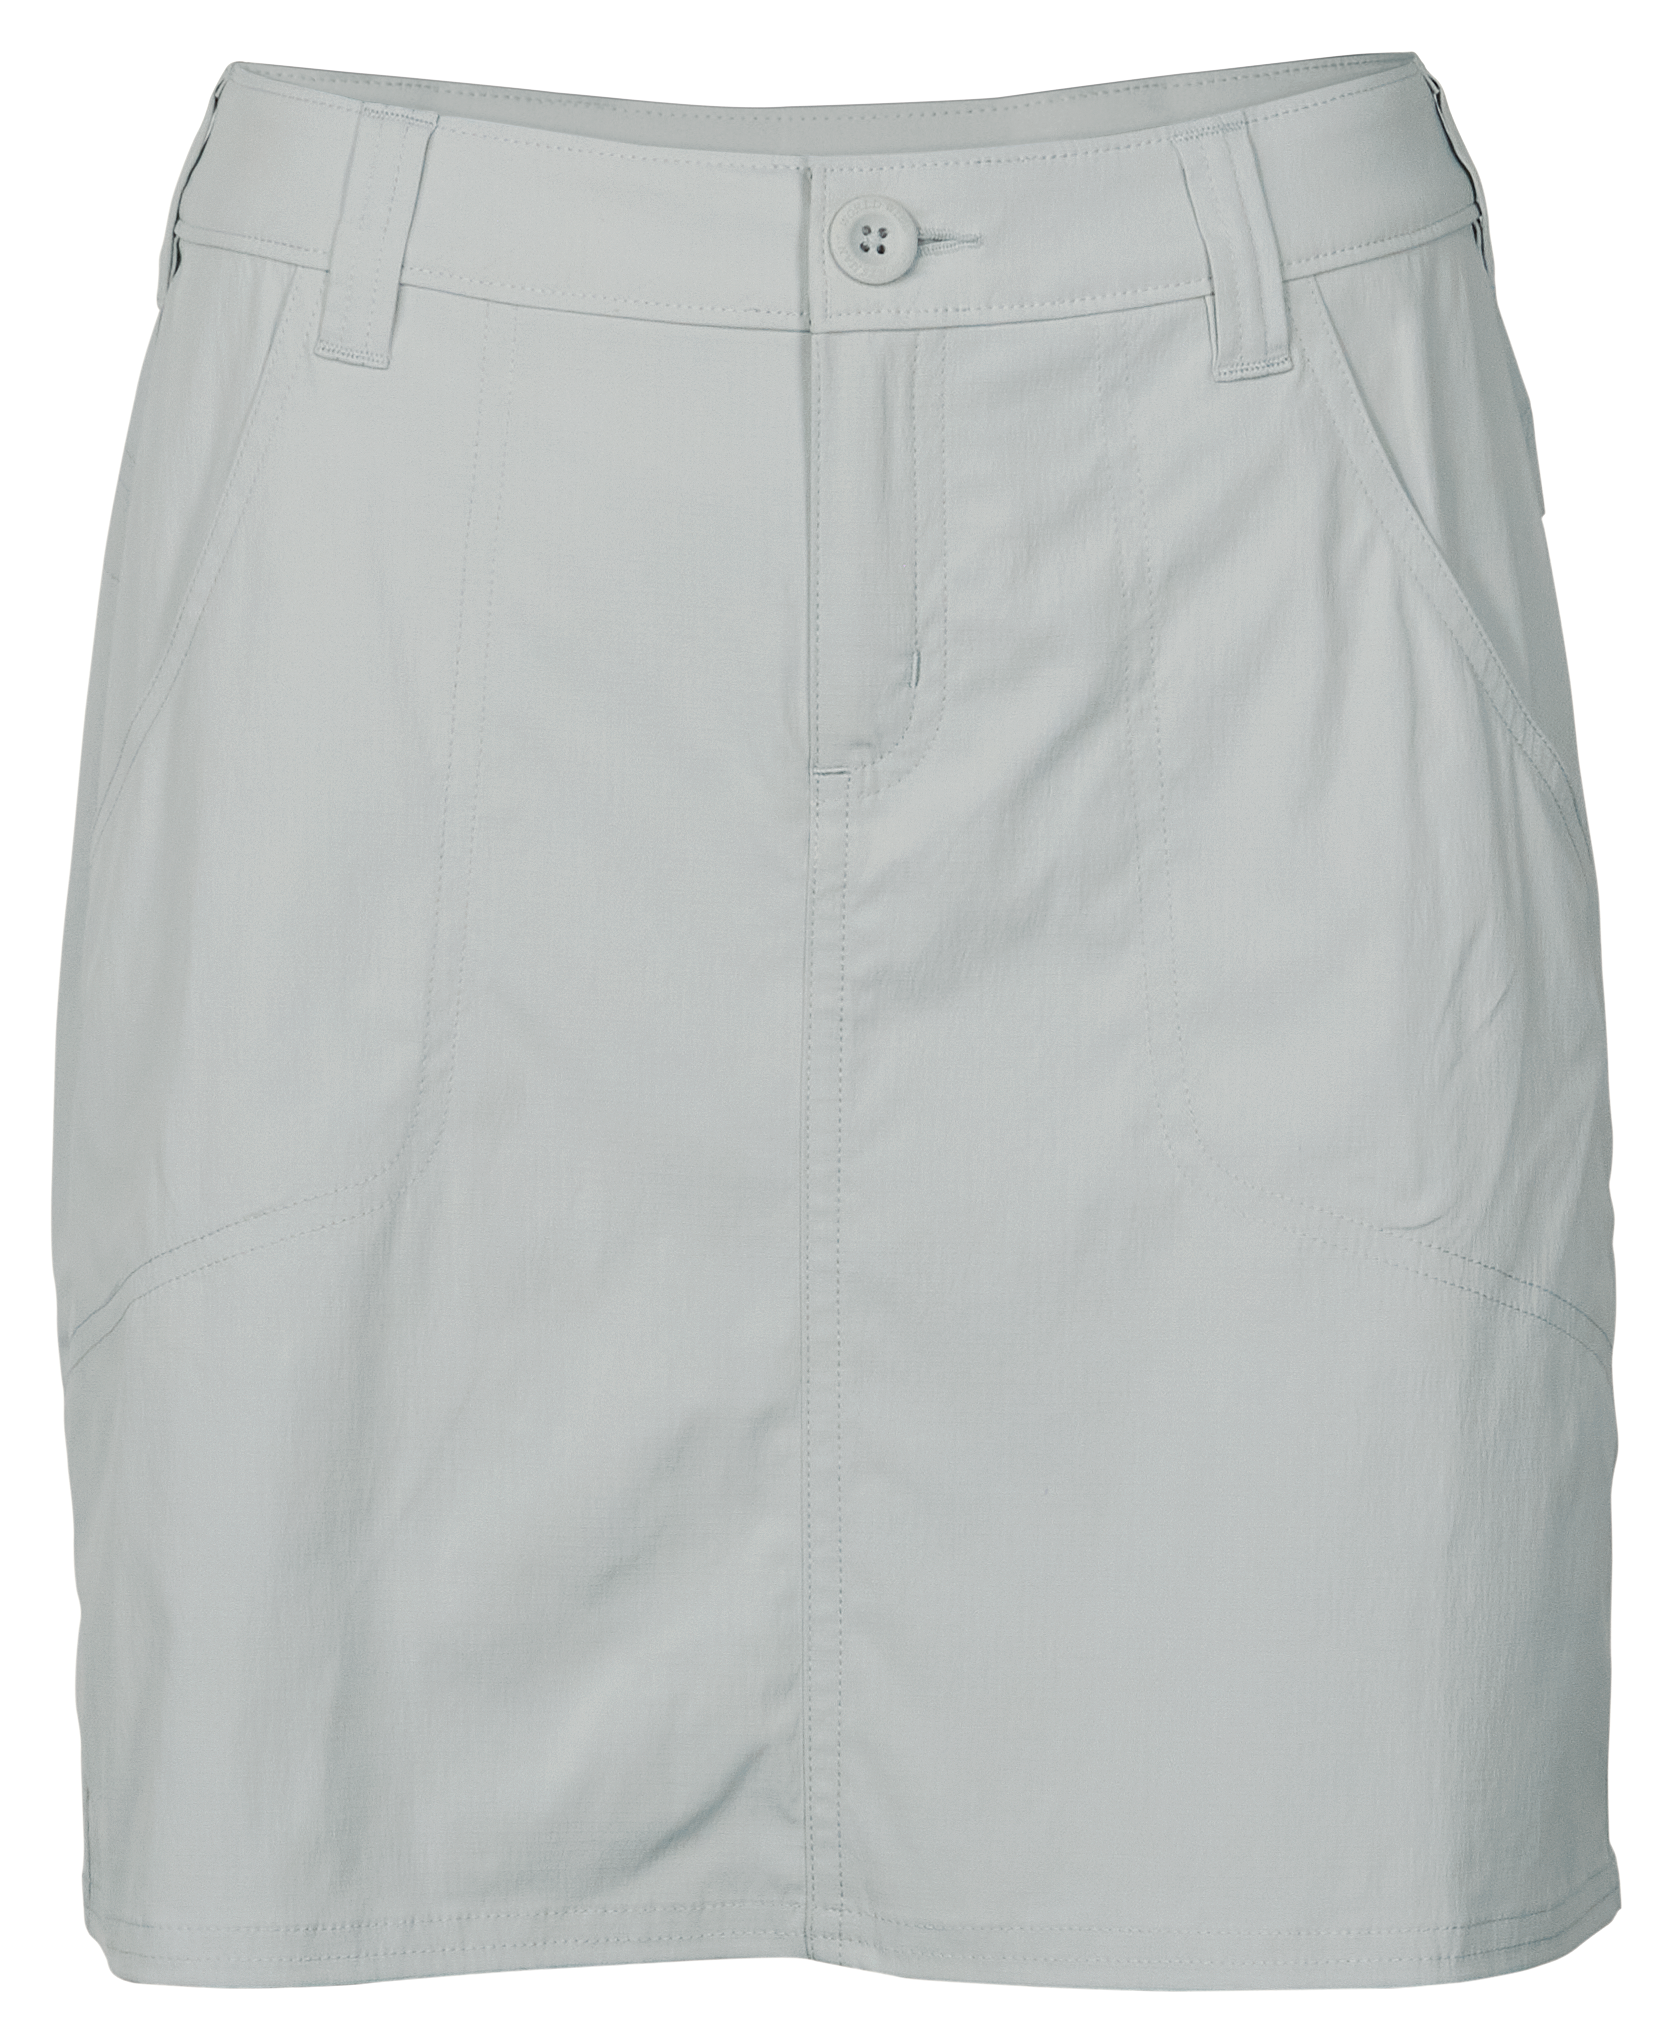 World Wide Sportsman Offshore Cargo Shorts for Ladies - High Rise - 2